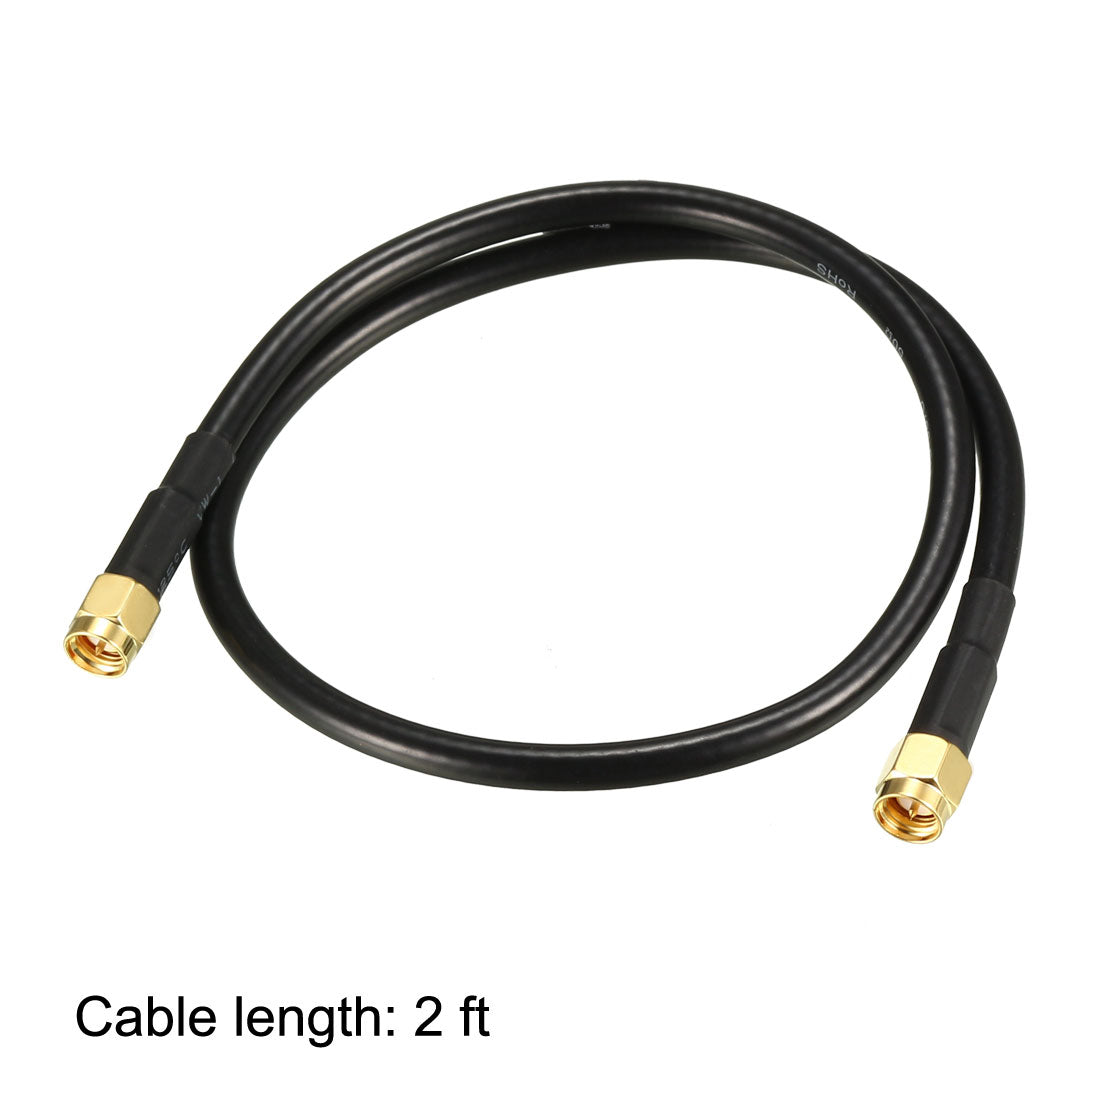 uxcell Uxcell Antenna Extension Cable SMA Male to SMA Male Coaxial Cable RG58 50 Ohm